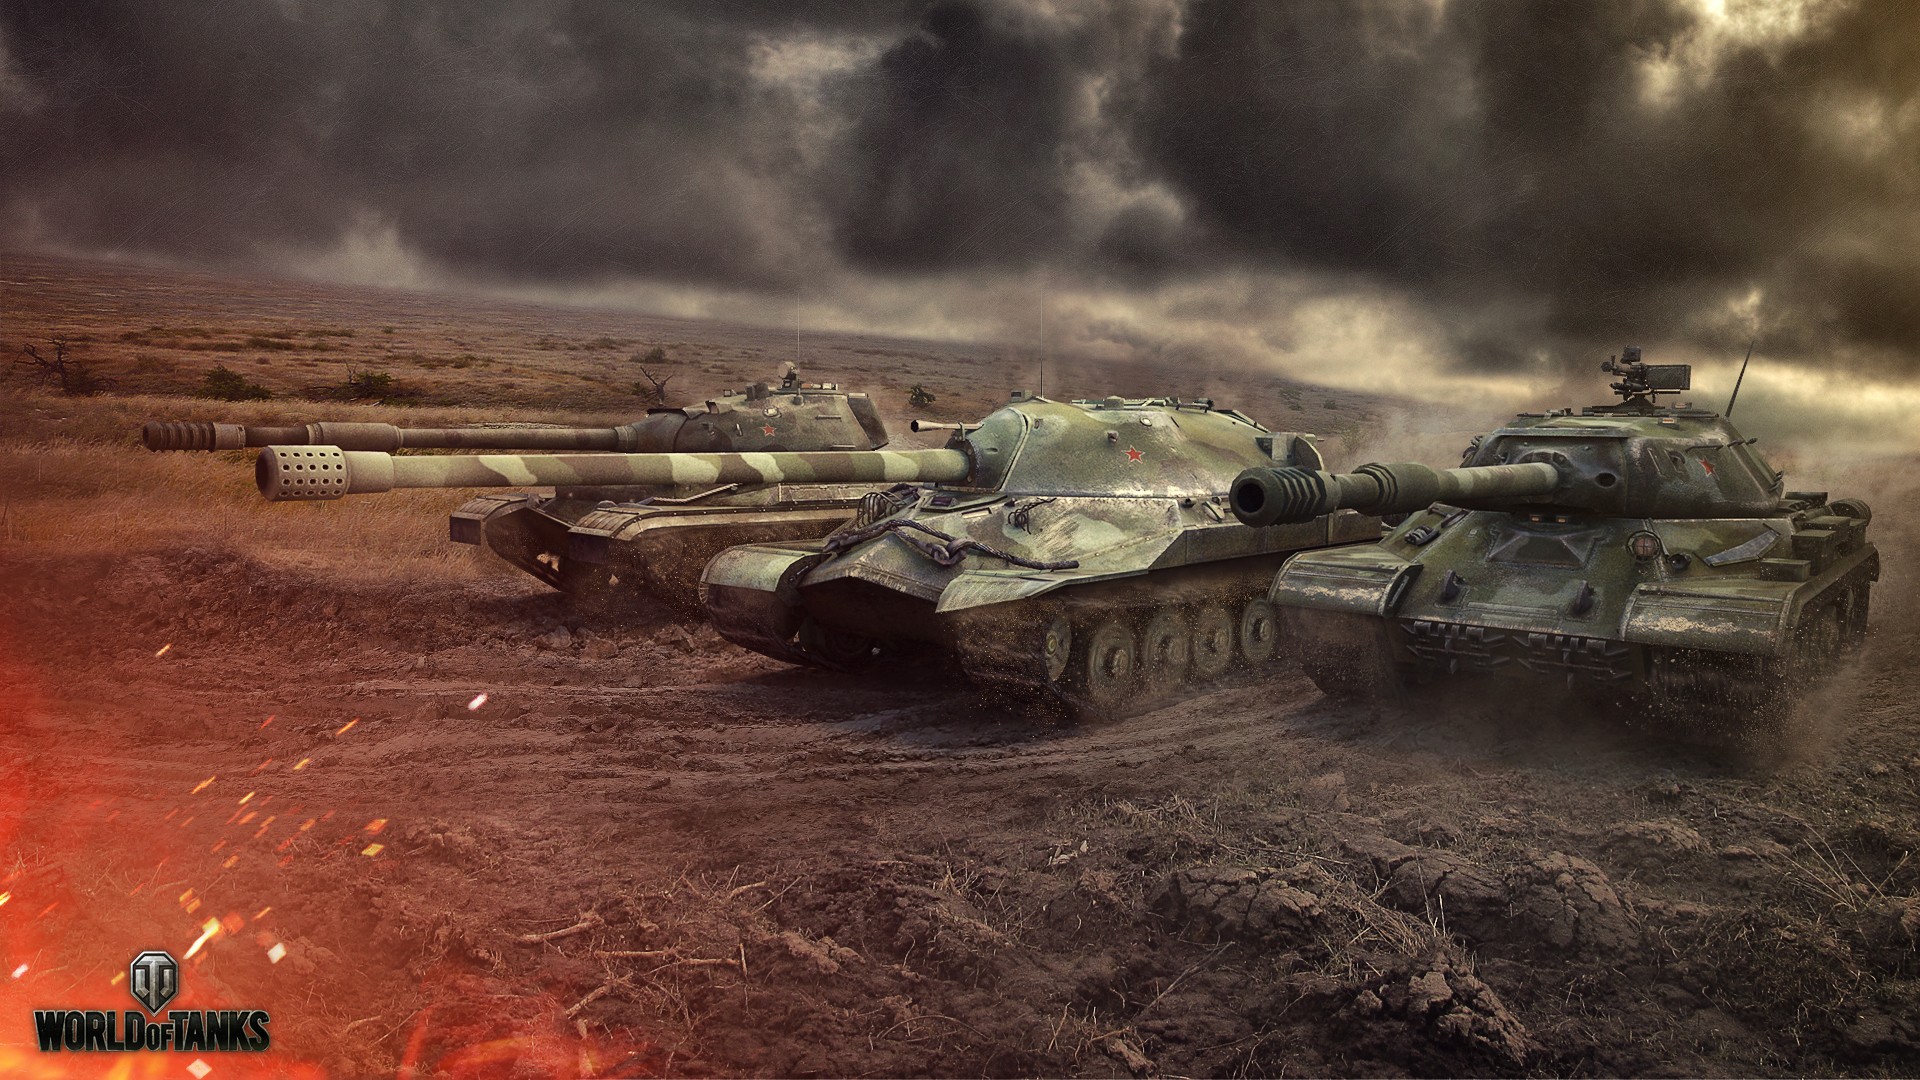 General 1920x1080 World of Tanks tank wargaming video games IS-7 IS-4 Russian/Soviet tanks